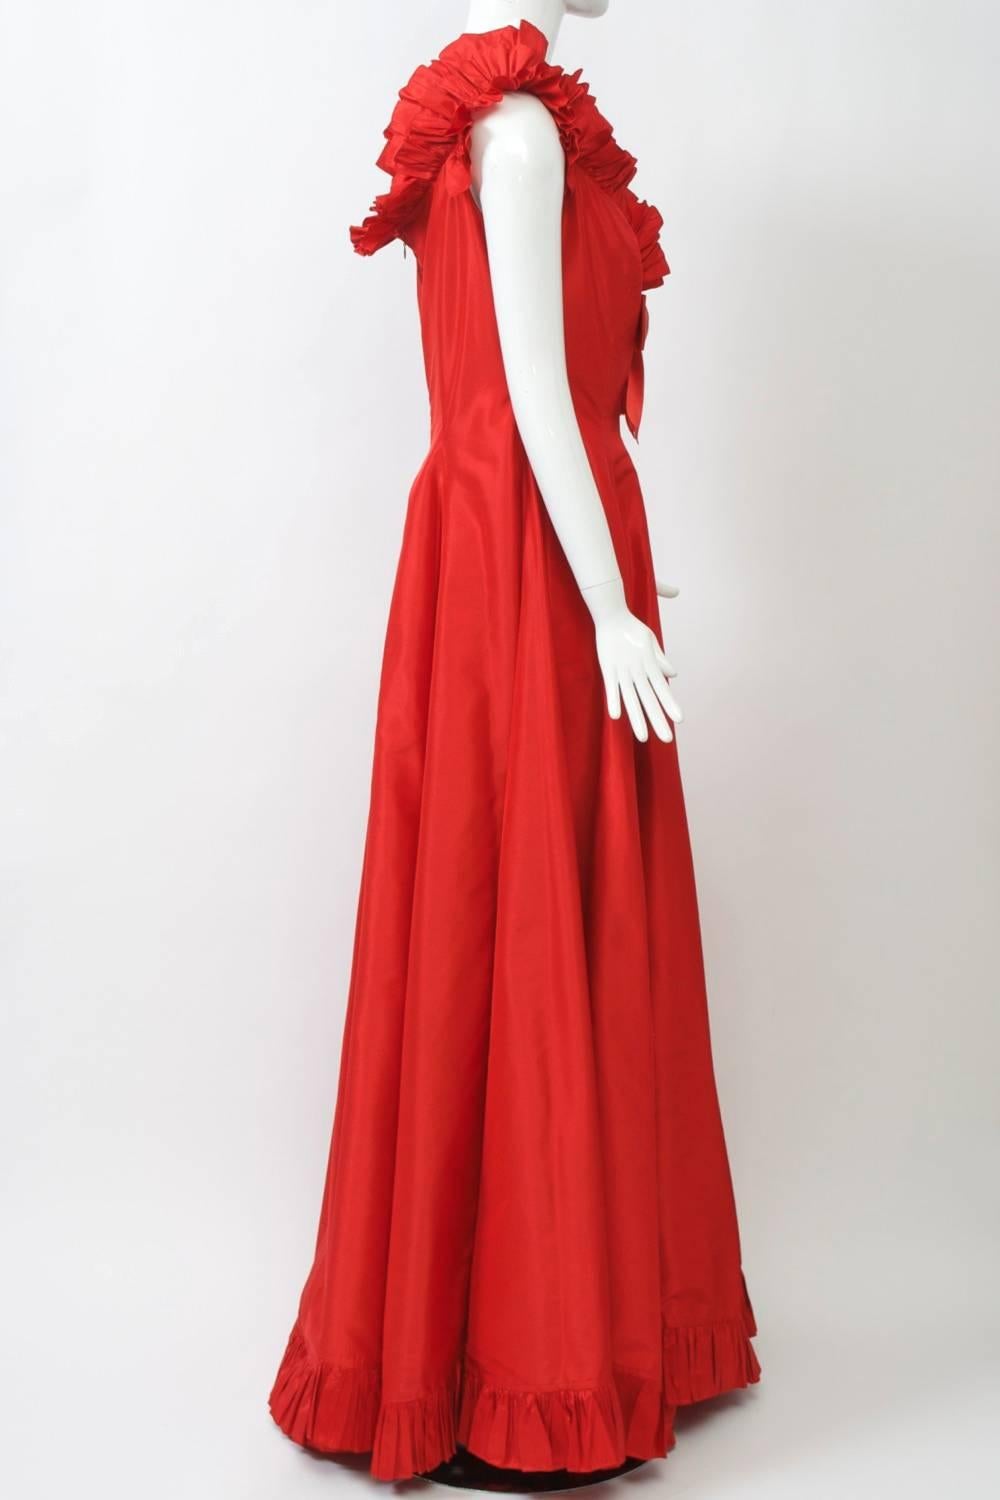 Vibrant red silk taffeta from master Oscar de la Renta shaped in princess style, sleeveless, the V-neck, hem and shoulders trimmed in a shirred ruffle and finished with a bow and rhinestone embellishment at the cleavage. Scooped and ruffled neck in